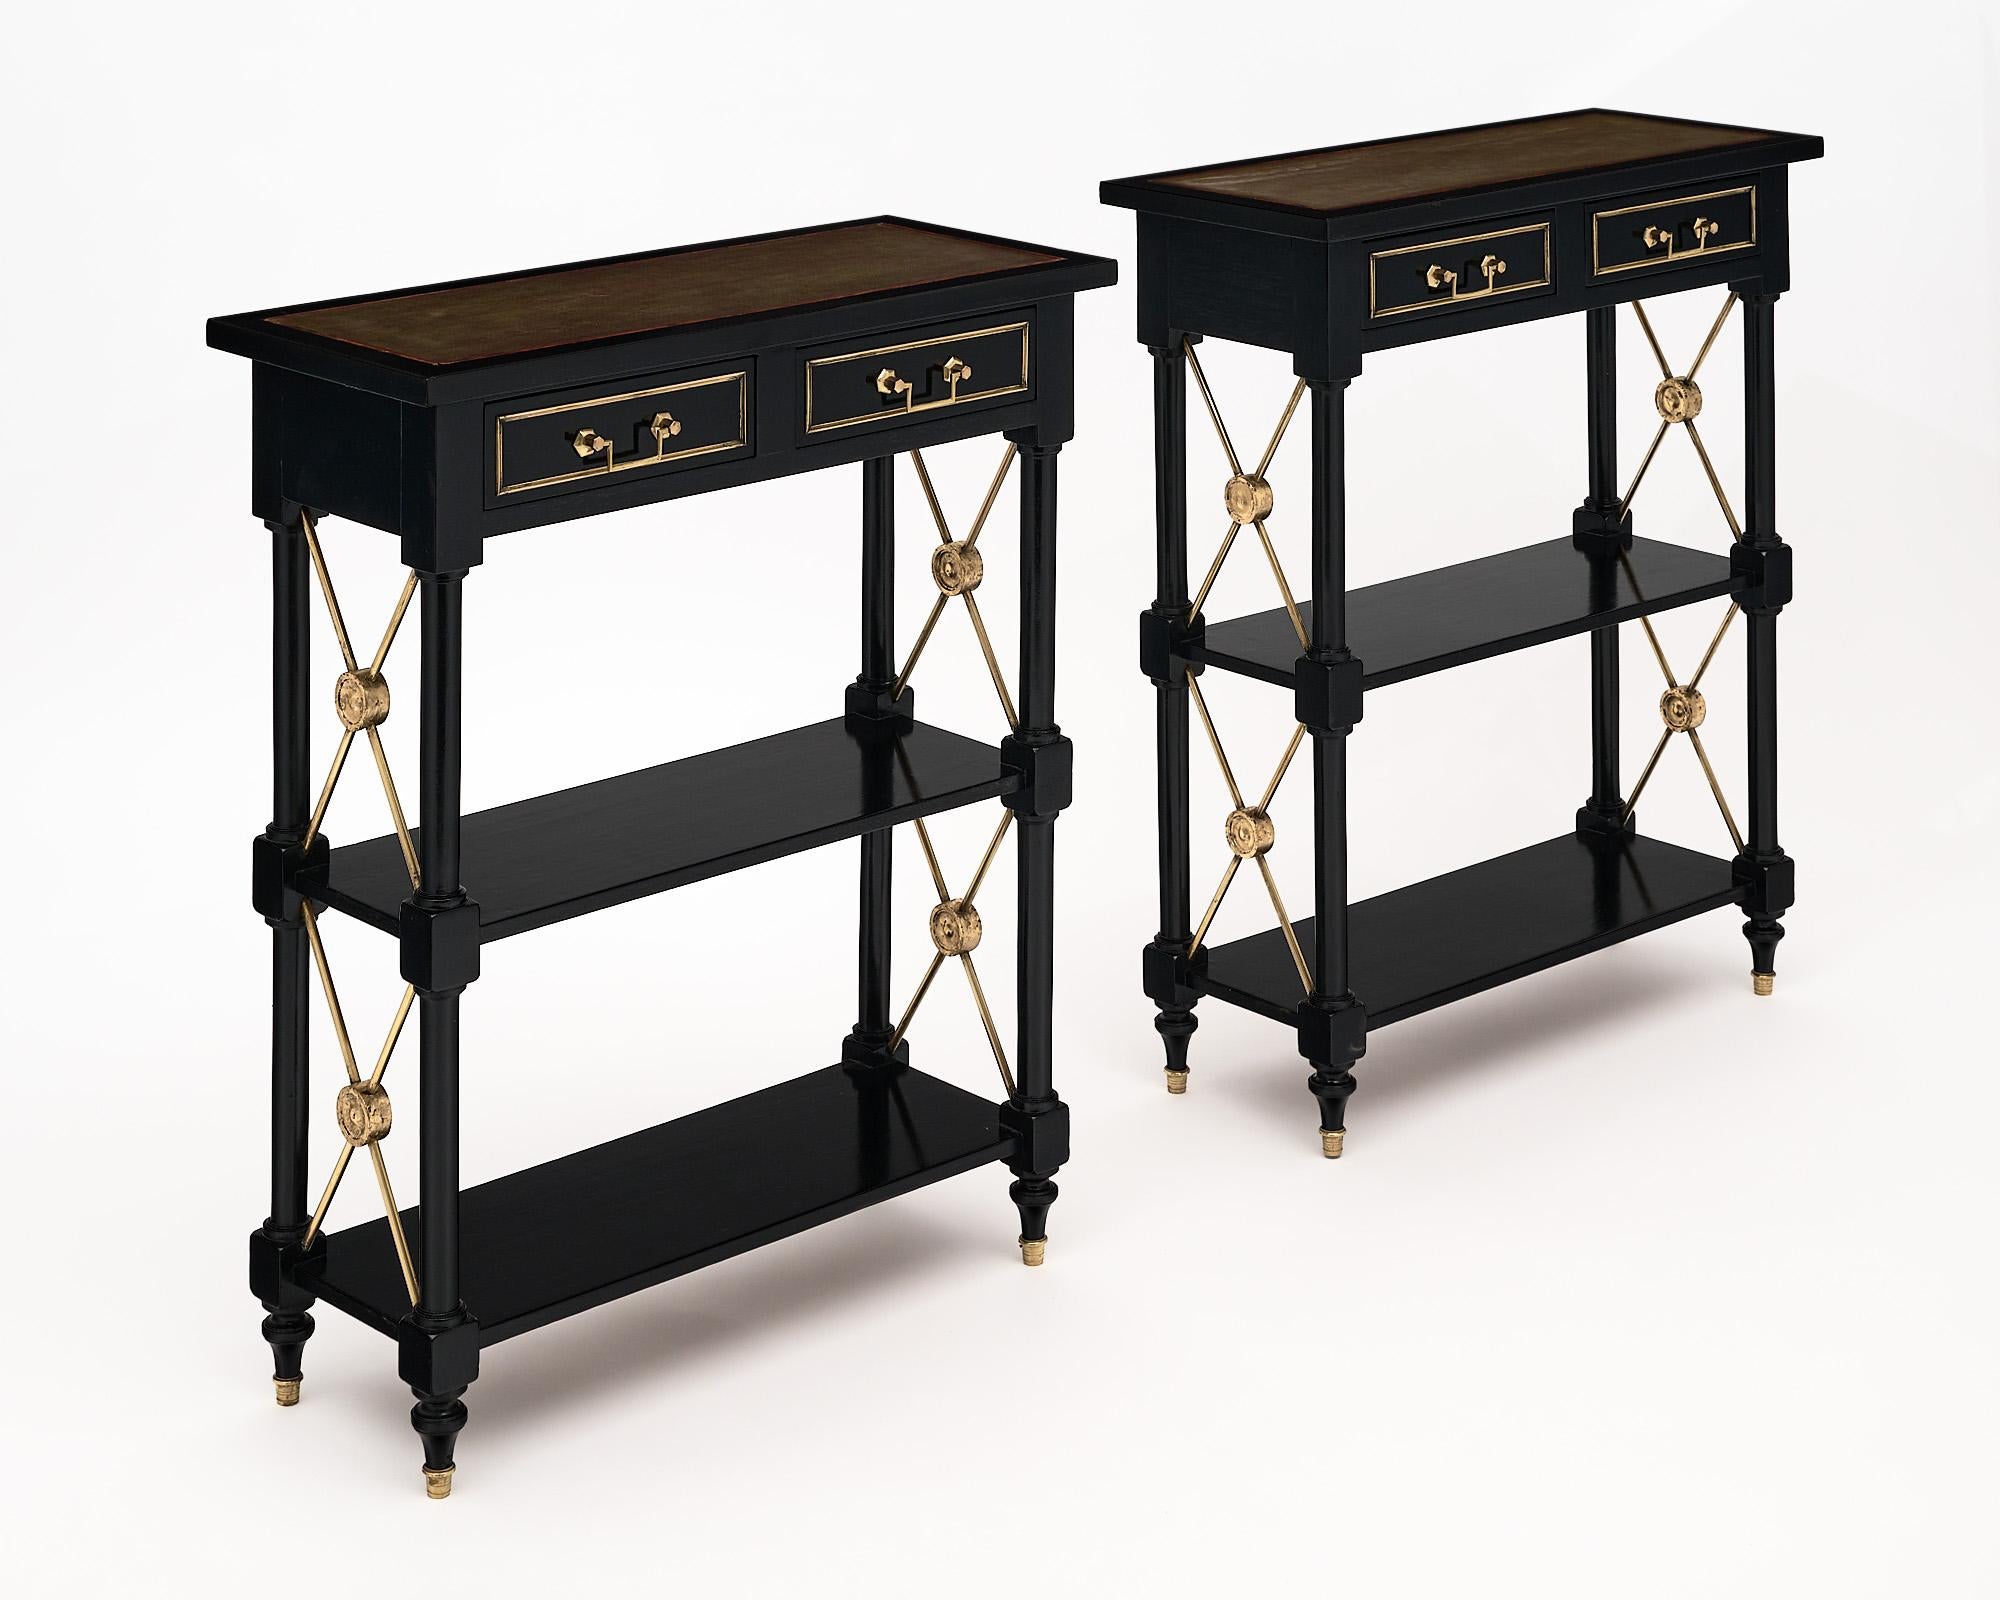 Pair of console tables, French, by Maison Jansen made of Mahogany, ebonized and French Polished. Each side table features two dovetailed drawers with their original brass handles. The tops are original stained moleskin. Two wooden shelves are